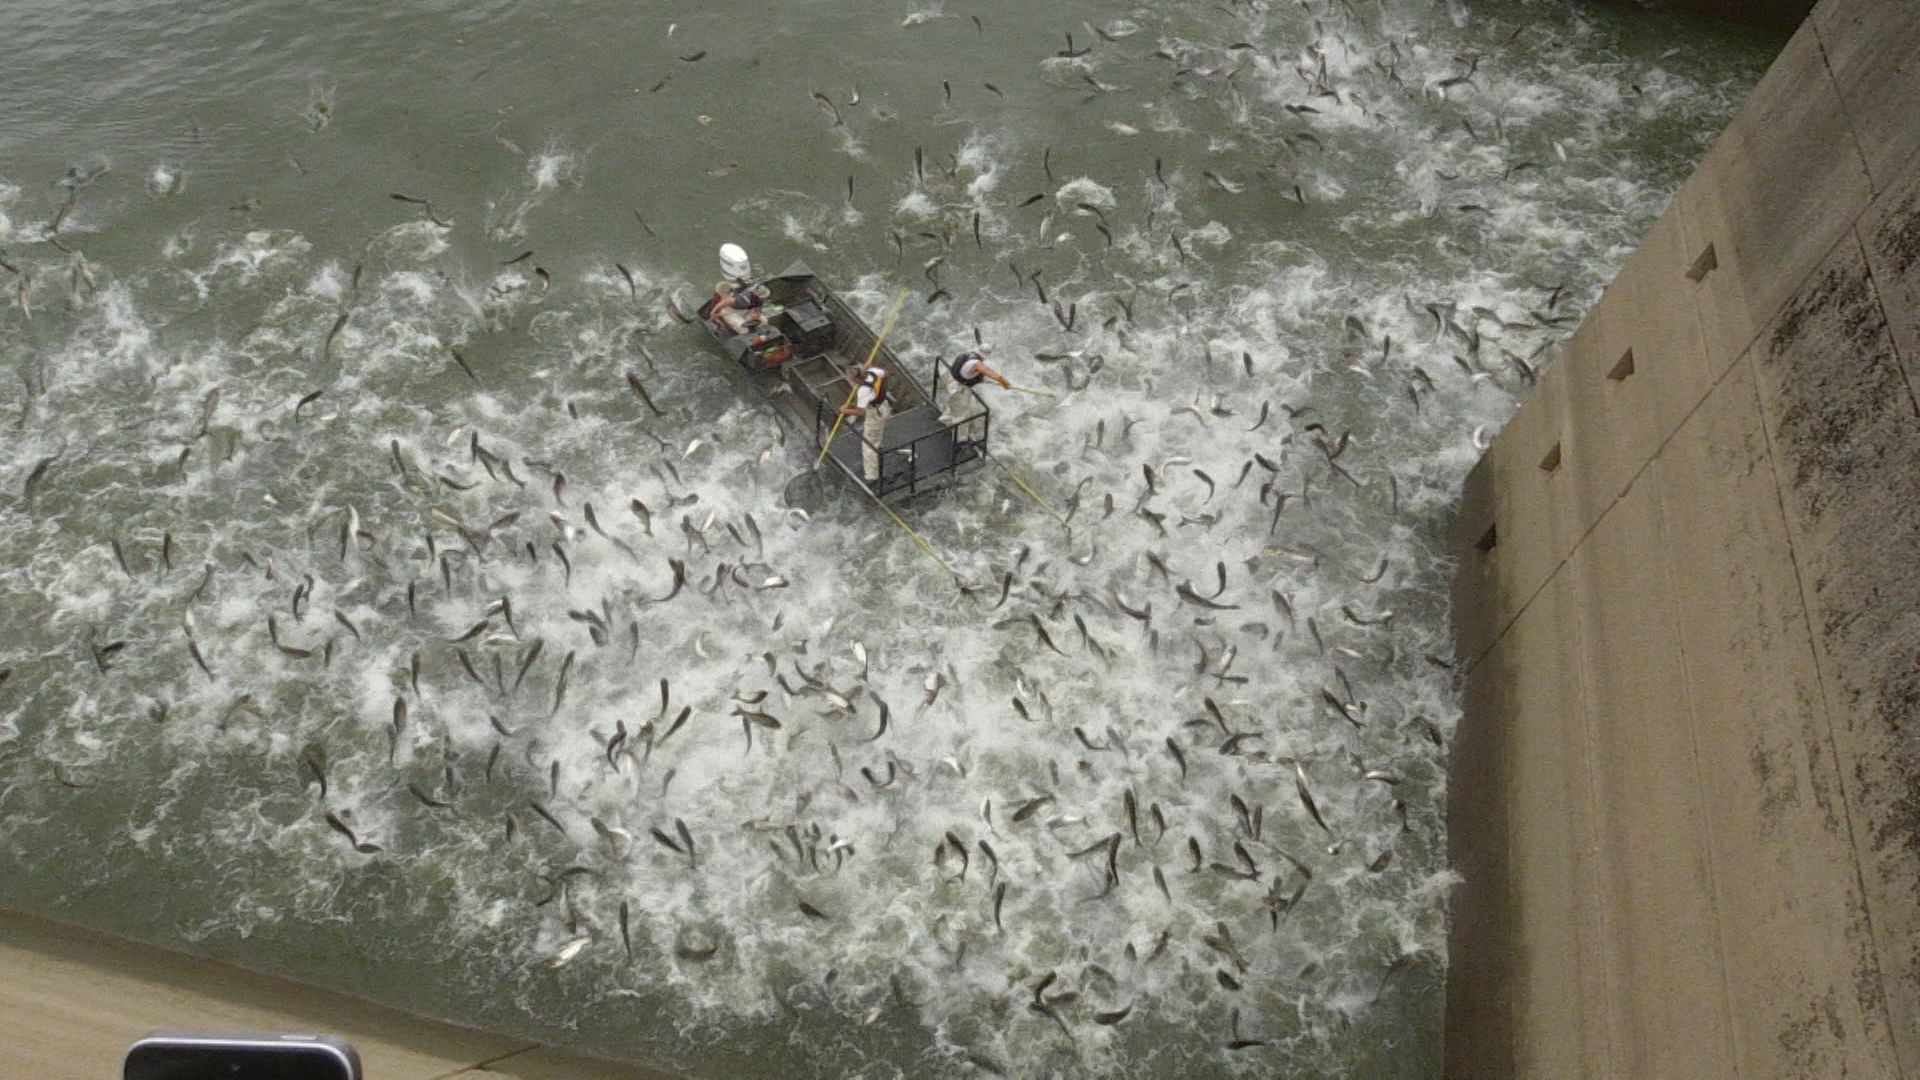 There's a possible breakthrough in ending the carp invasion.